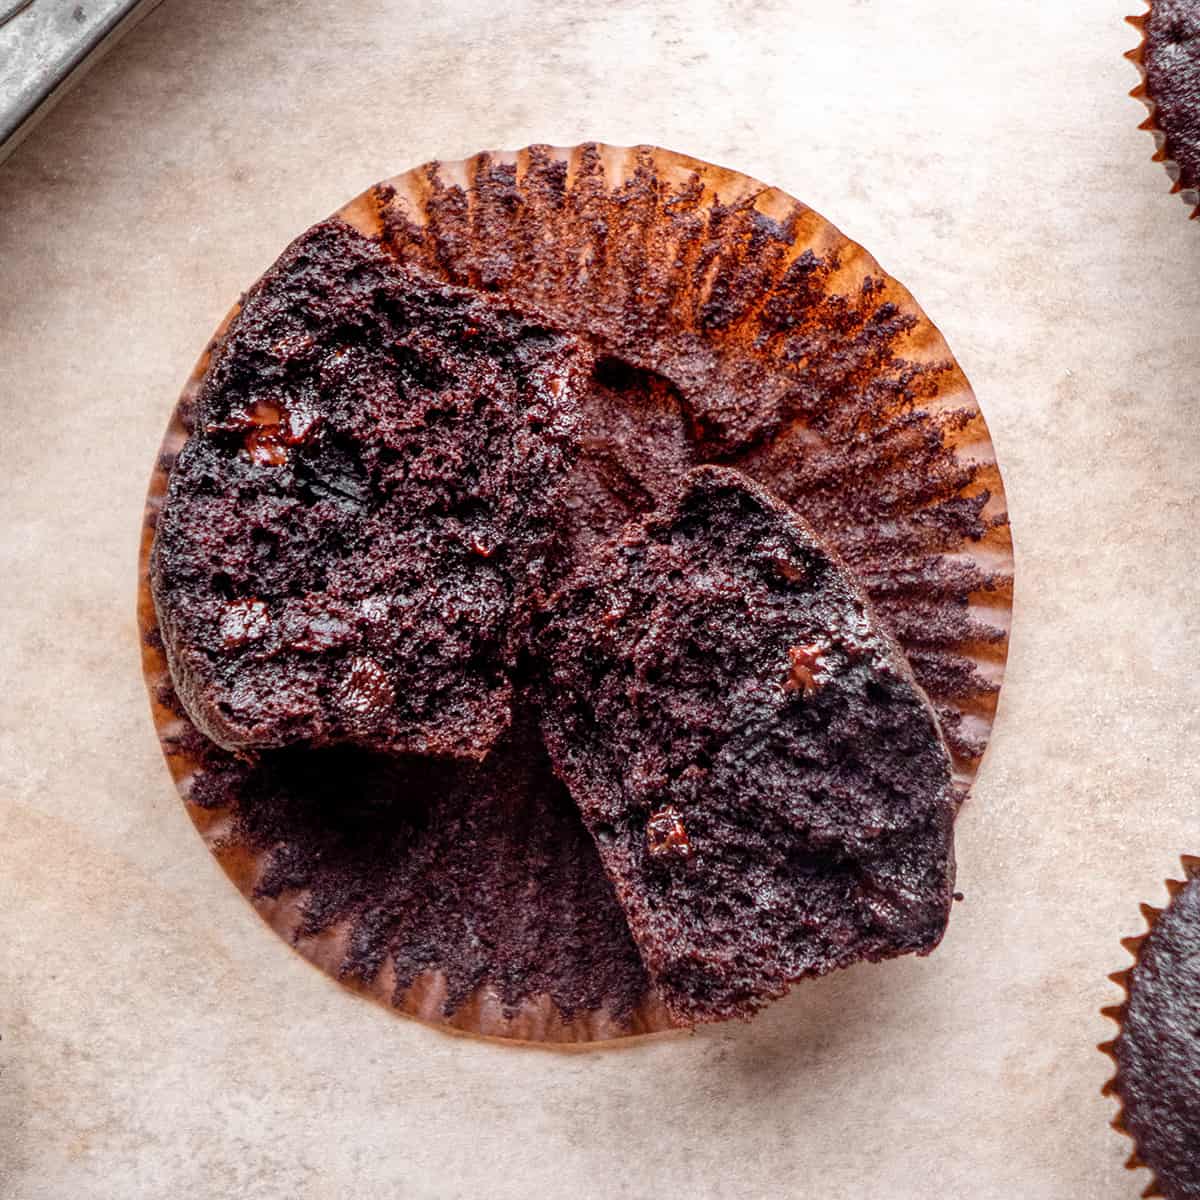 a Chocolate Banana Muffin cut in half laying o na muffin liner so the center is visible